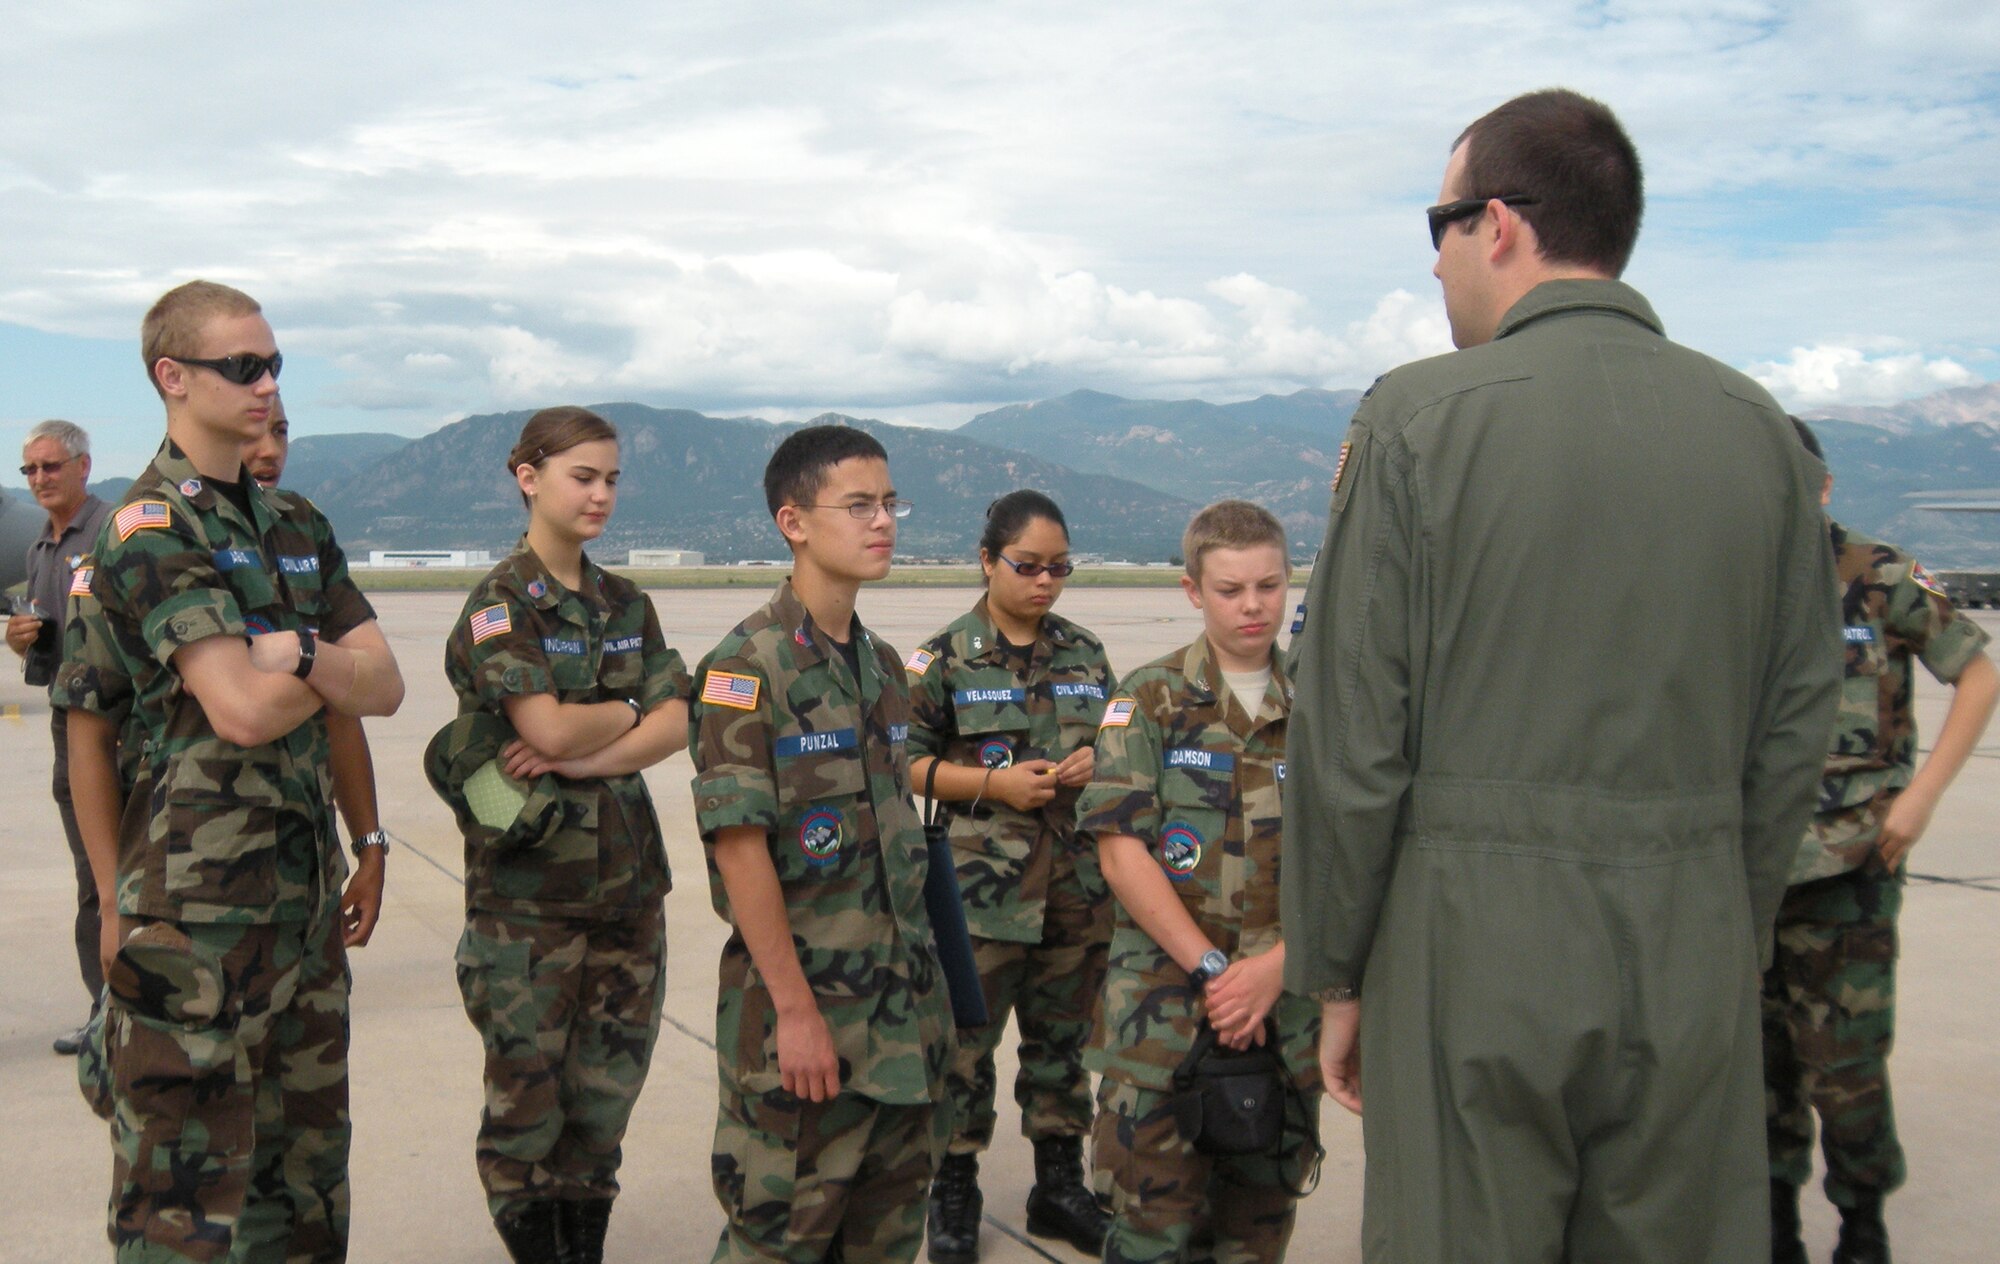 Capt. Chris Rothe, an Air Force Reserve C-130 Hercules pilot, briefs Colorado Civil Air Patrol cadets on the specifications of the aircraft July 30 during a CAP and International Air Cadet Exchange program tour at Peterson Air Force Base, Colo. More than 30 cadets from Colorado as well as Great Britian, Belgium and Turkey visited the Air Force Reserve's 302nd Airlift Wing to gain a better perspective on military aeronautics as well as see the wing's aircrew life support element. Captain Rothe, a former CAP cadet, is assigned to the wing's 731st Airlift Squadron. (U.S. Air Force photo/Rebekah Williamson)